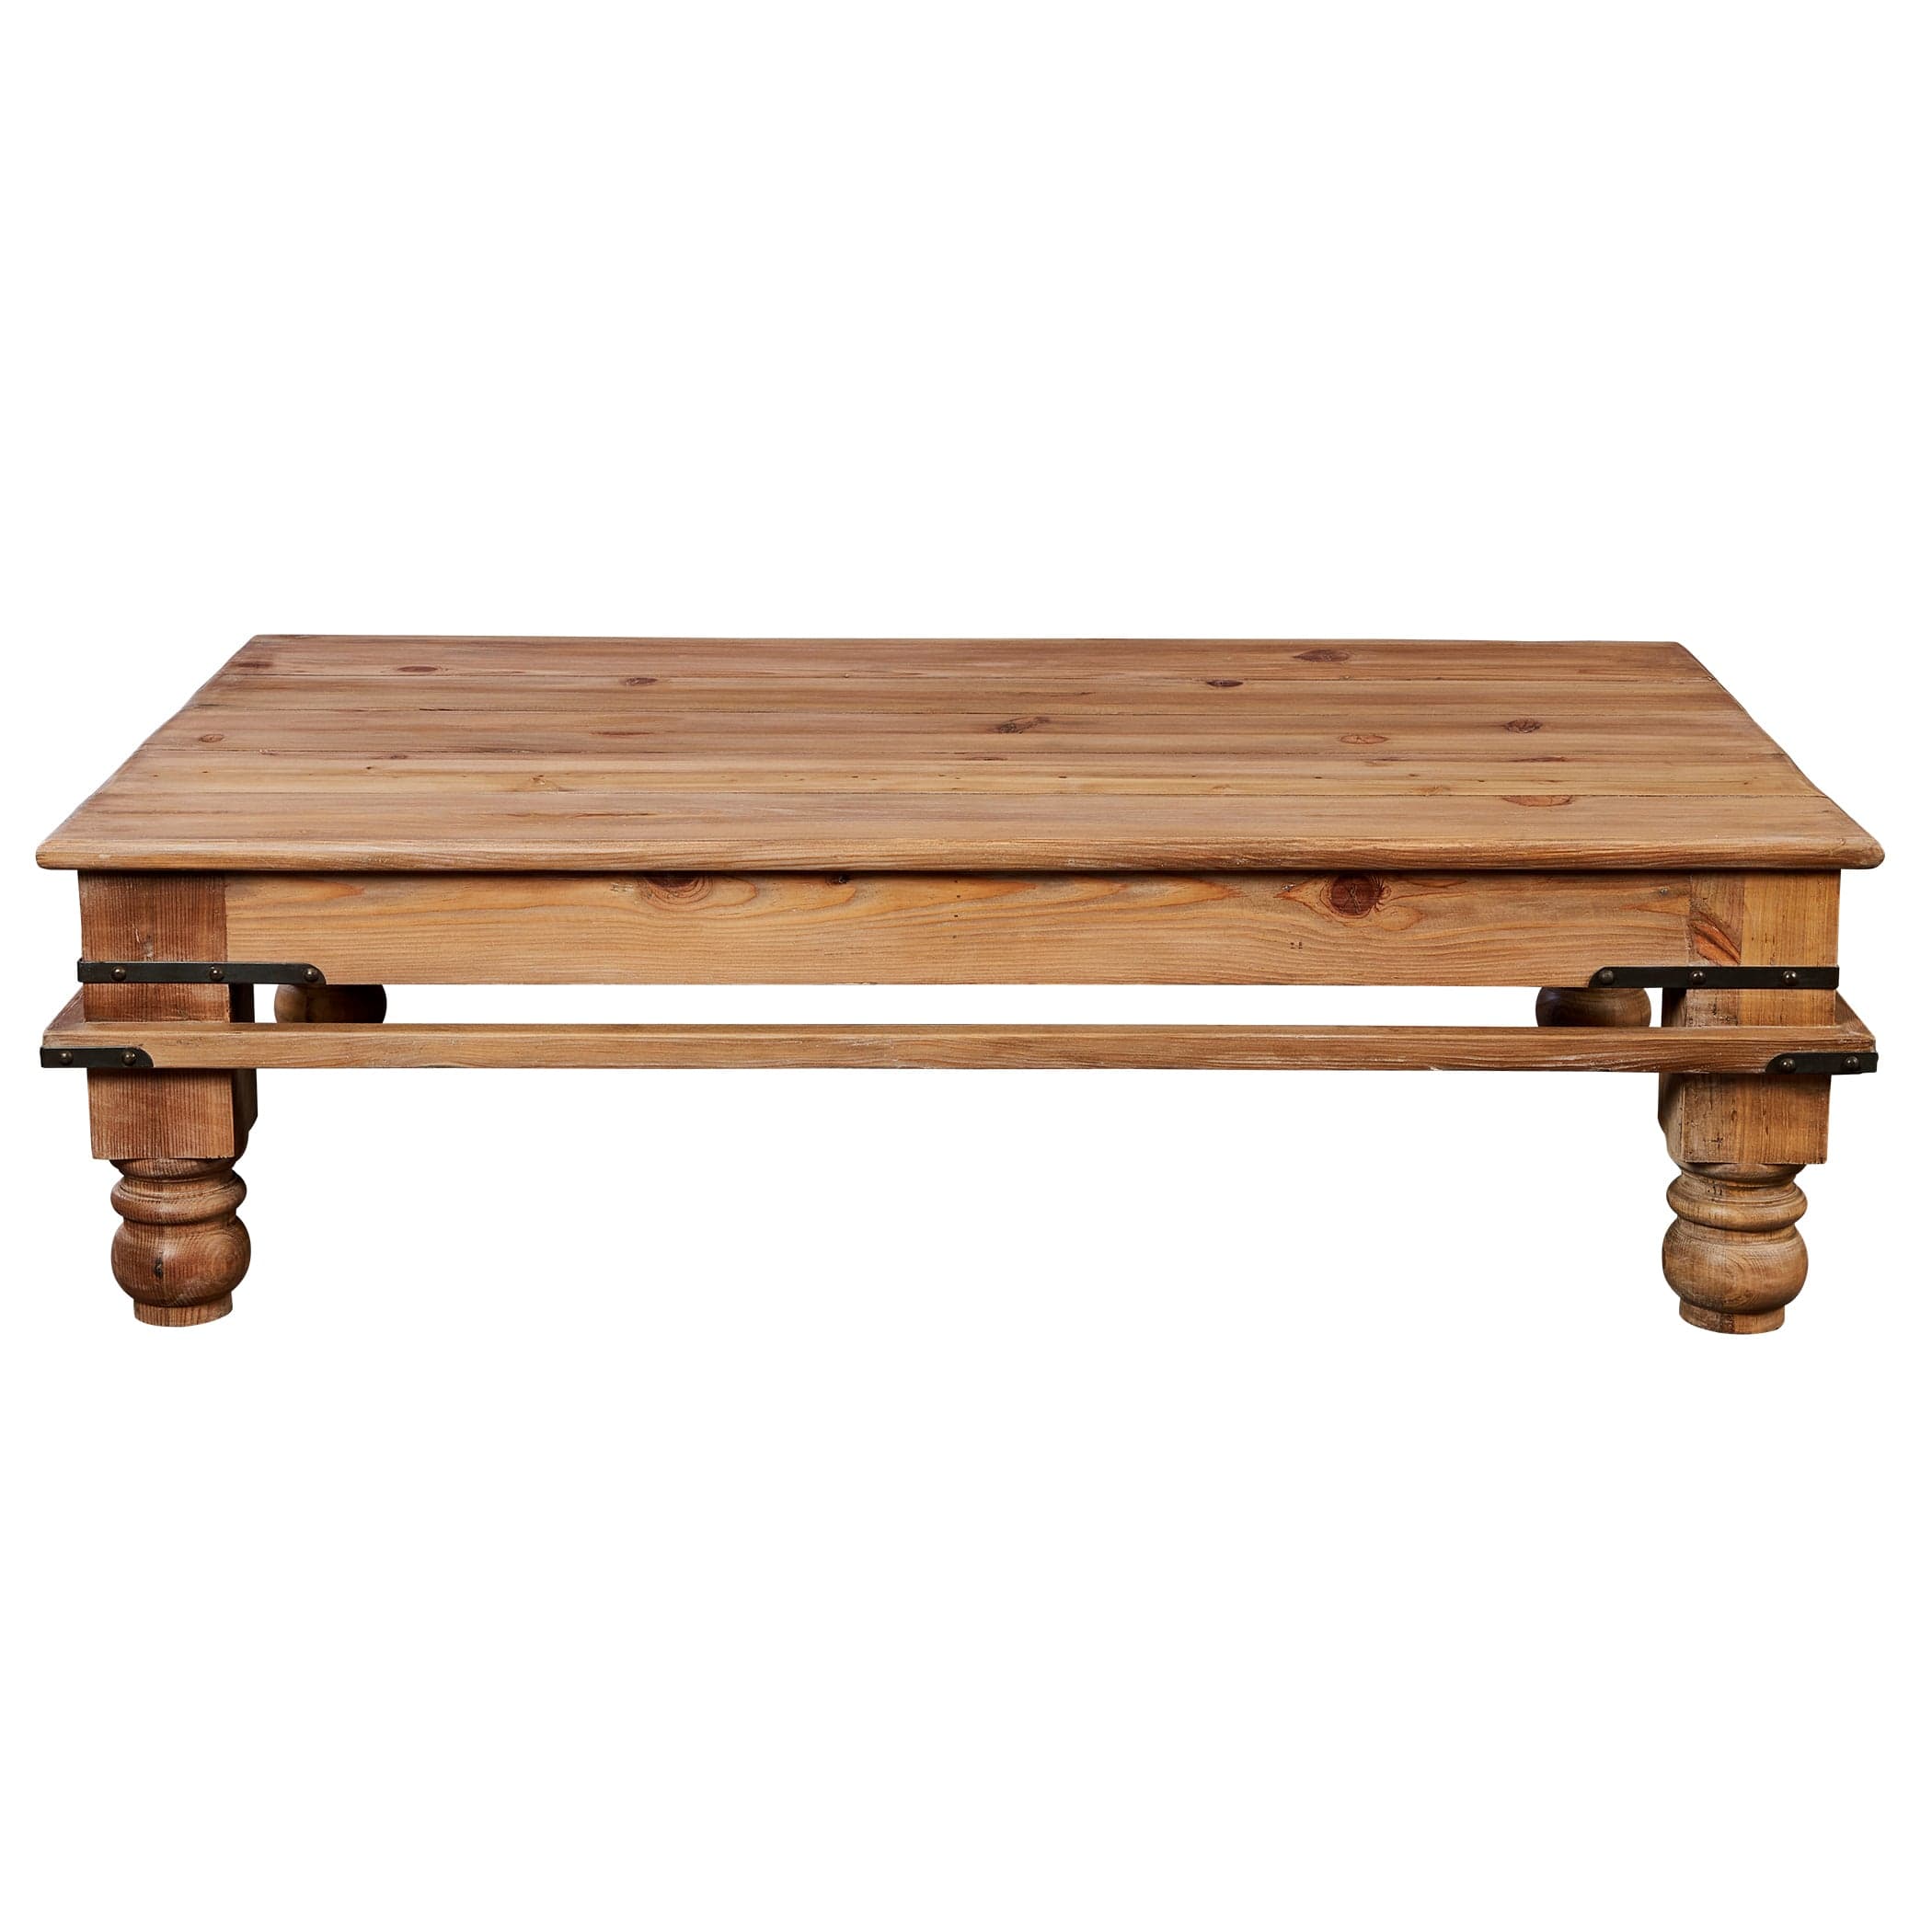 Hargett Pine Coffee Table Uttermost